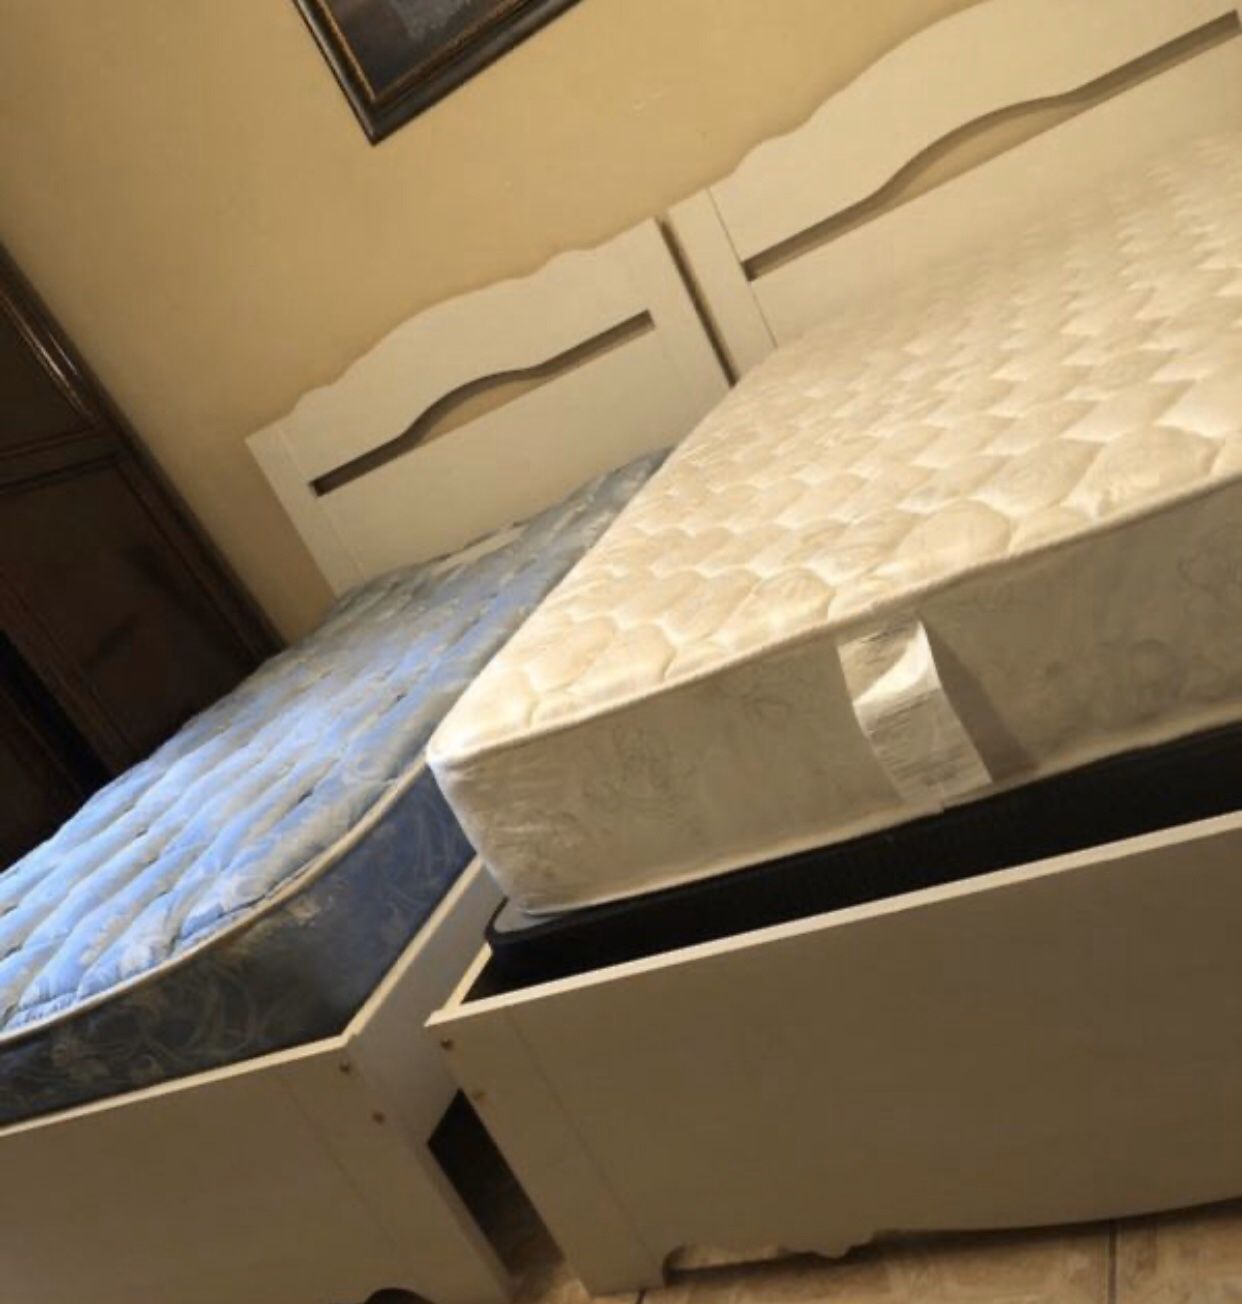 2 complete Twin bed frames and headboards, along with mattresses and box springs one nightstand all excellent condition